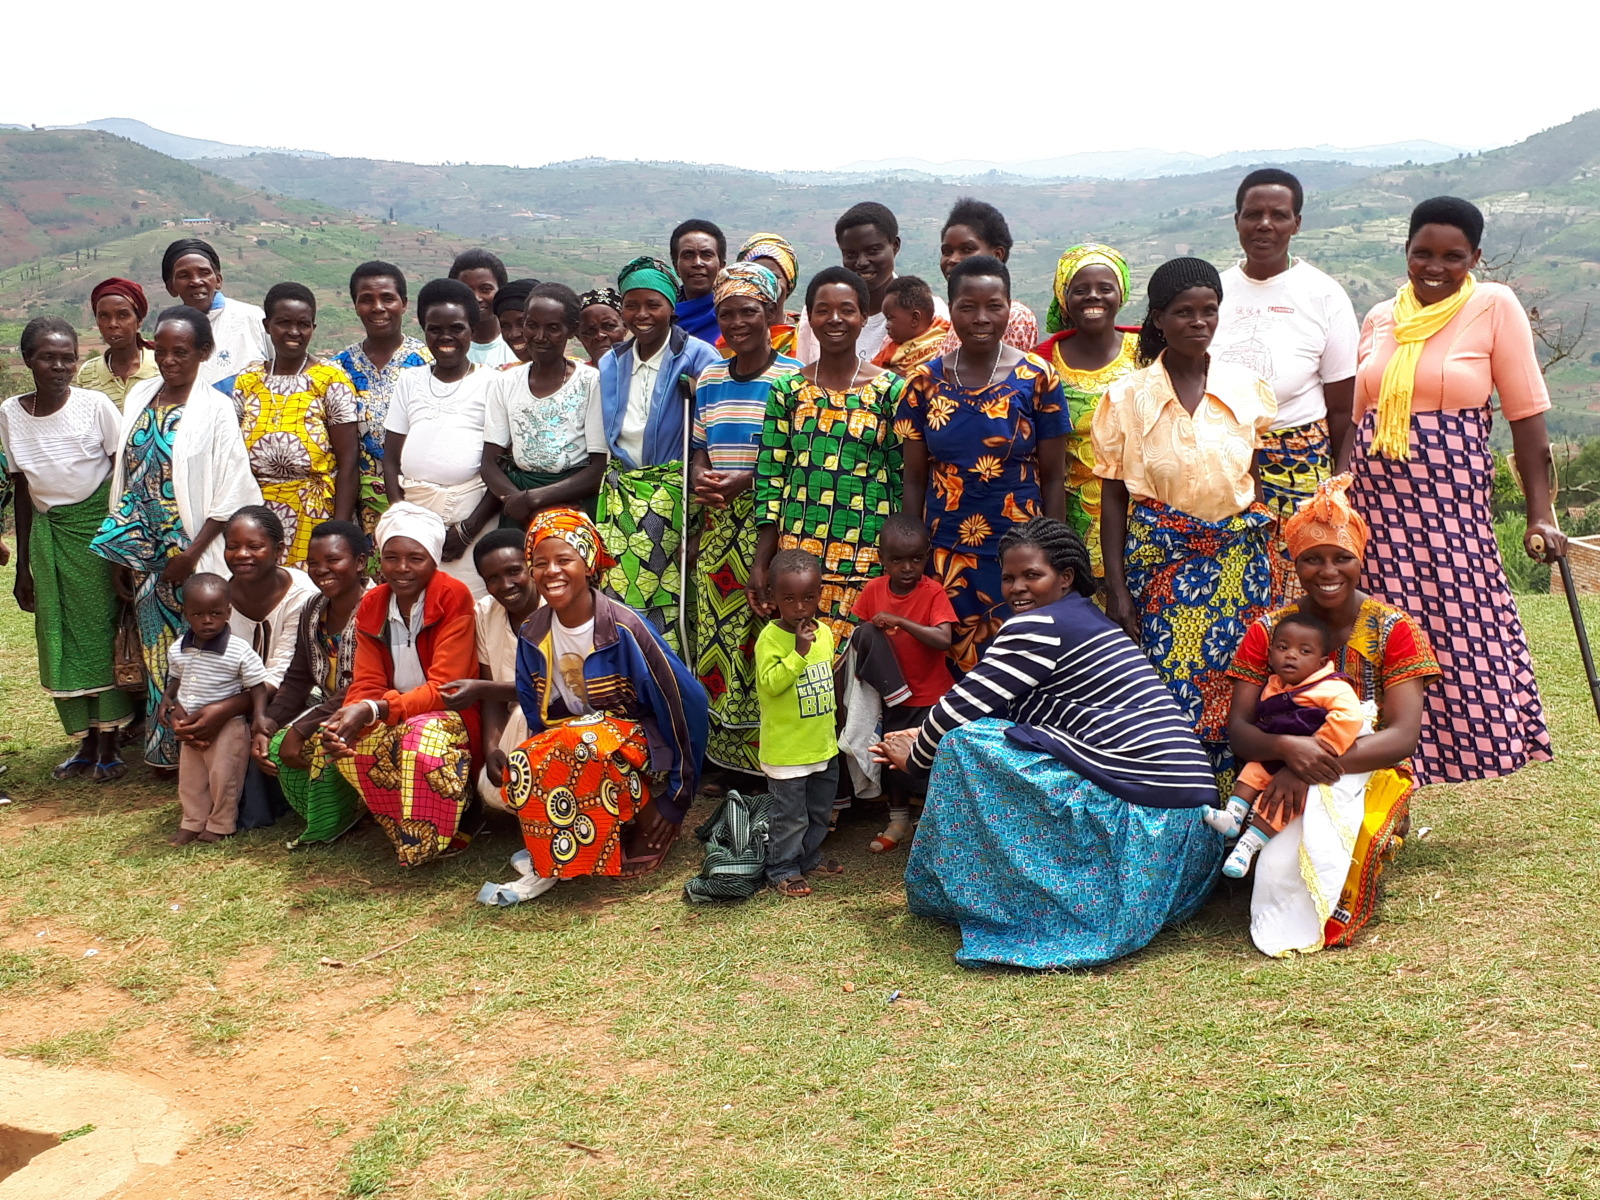 Members of a community group of women and girls with disabilities